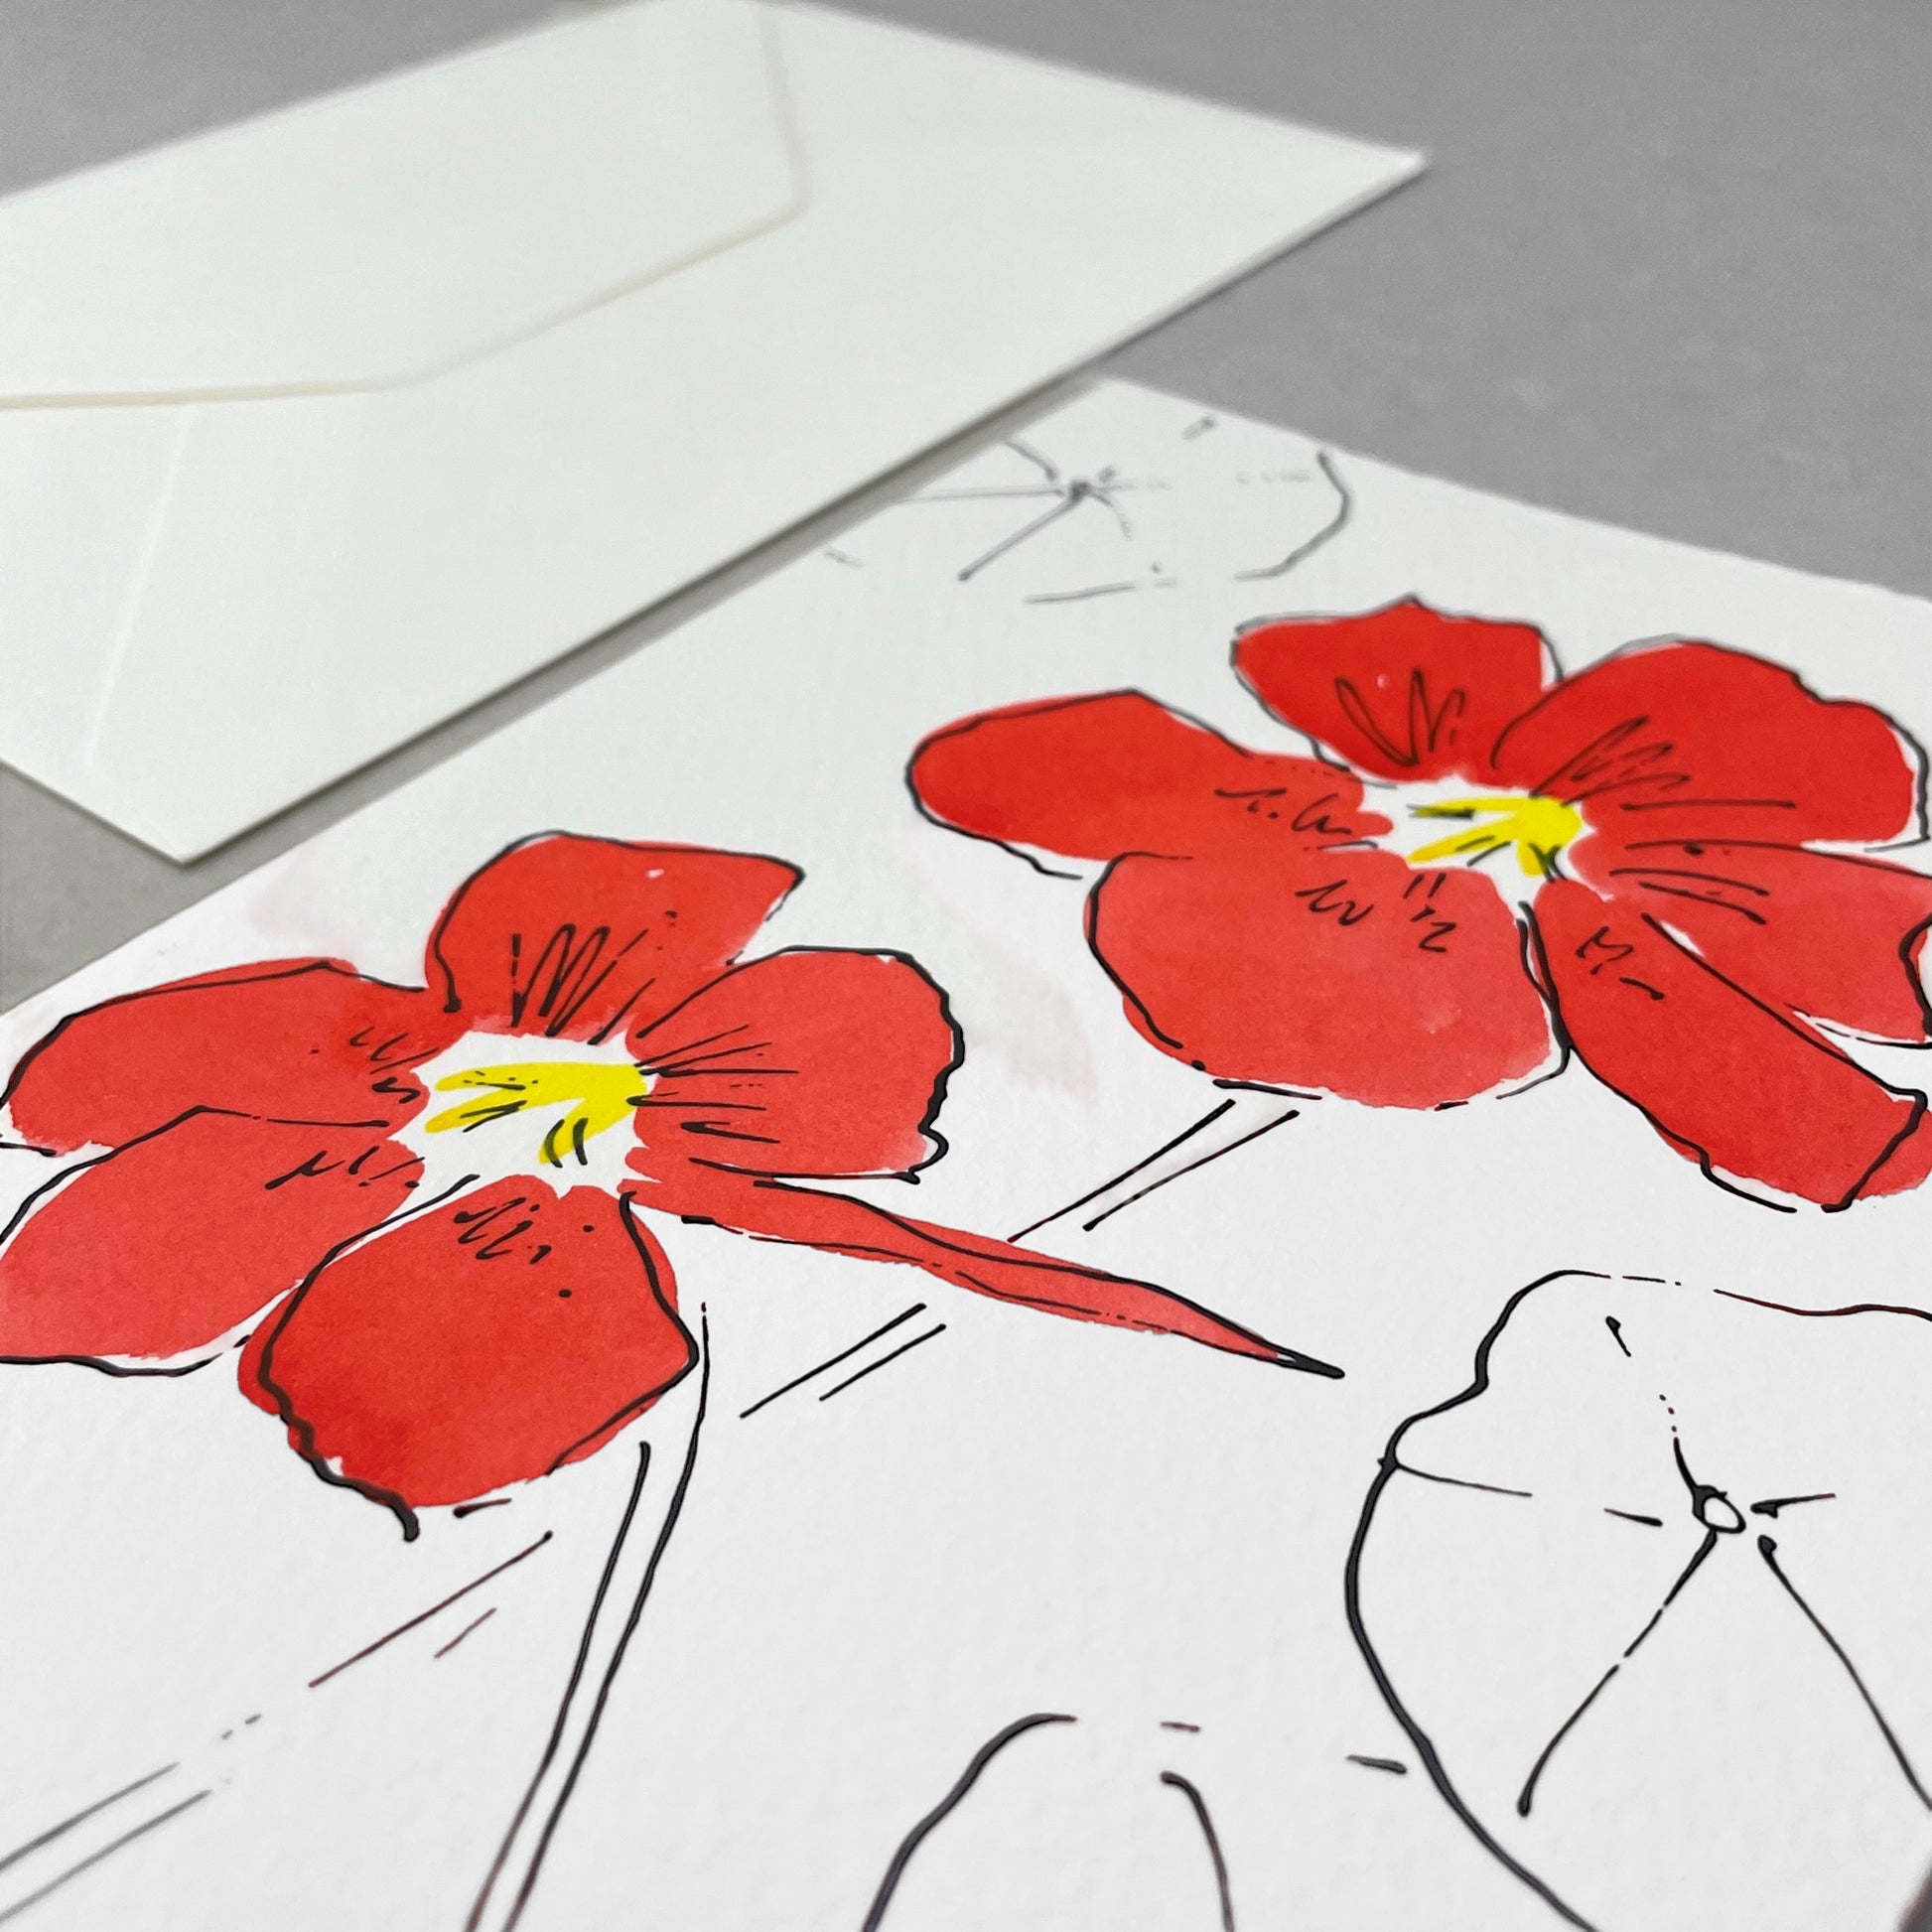 hand-painted greetings card of two red nasturtium flowers, by Scribble and Daub